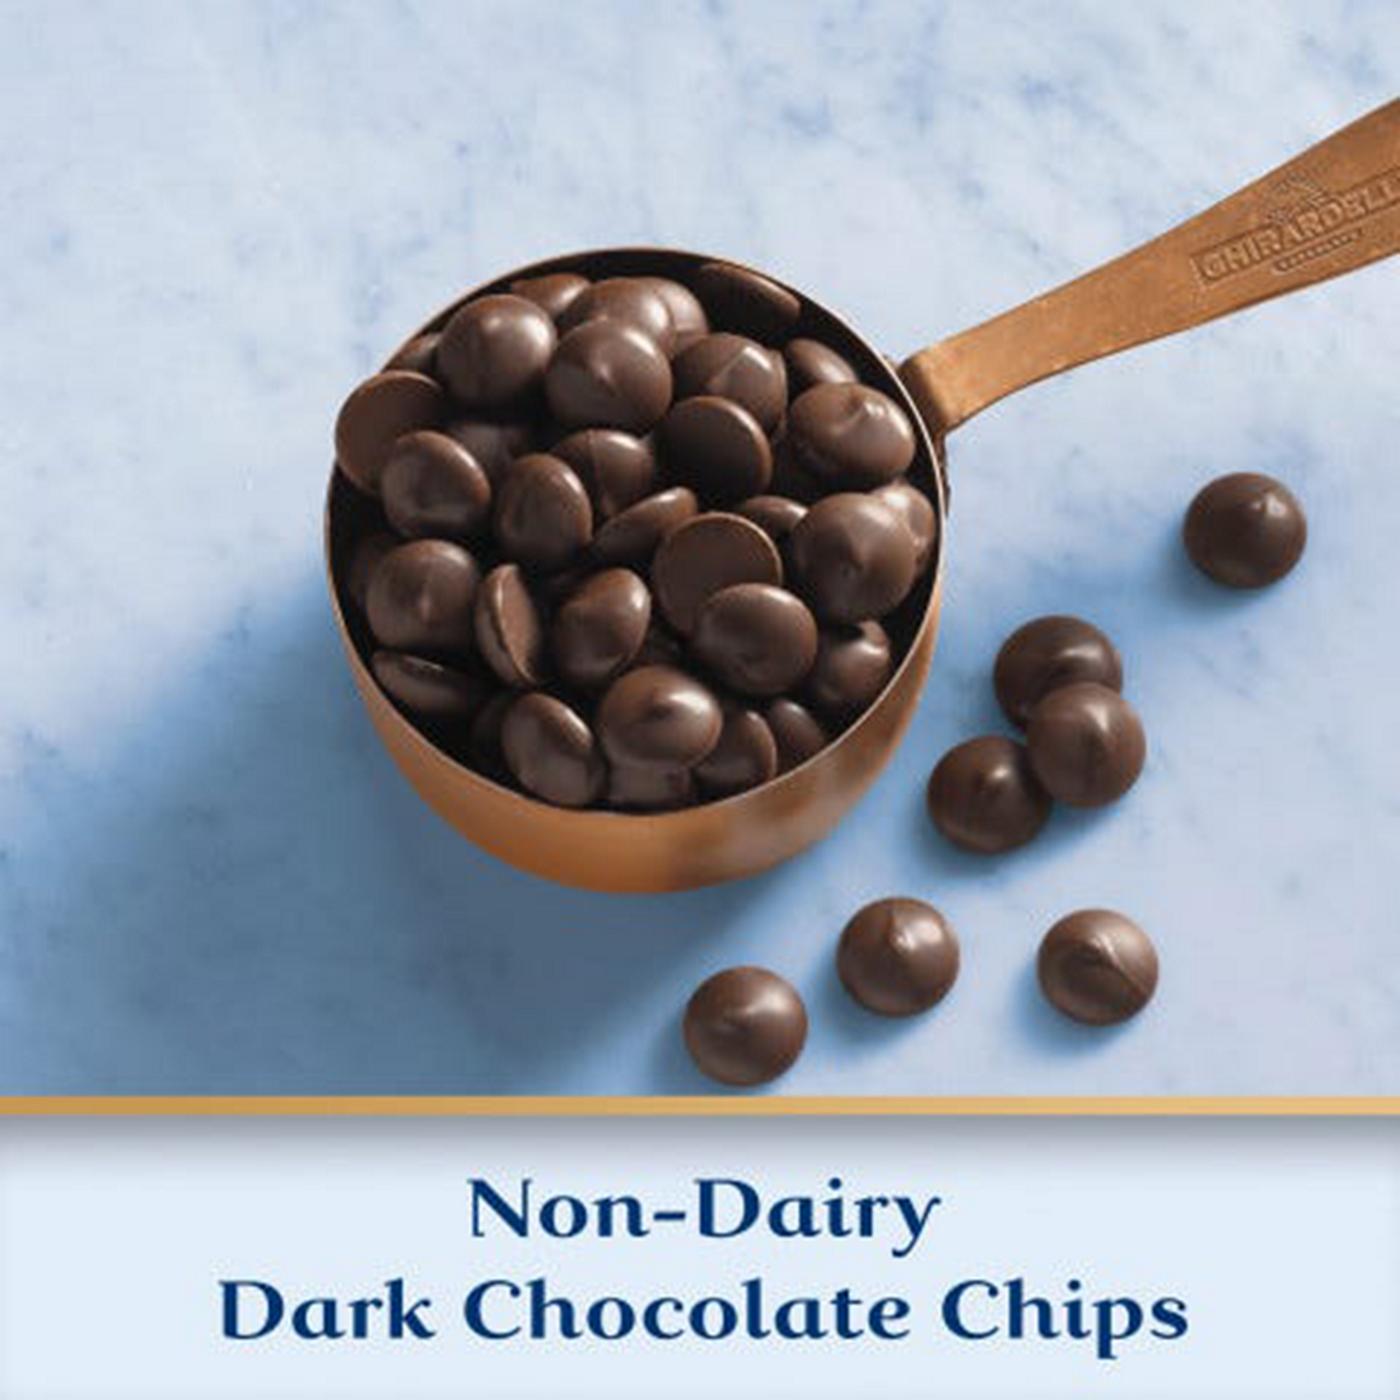 Ghirardelli Non-Dairy Dark Chocolate Chips with 52% Cacao; image 2 of 2